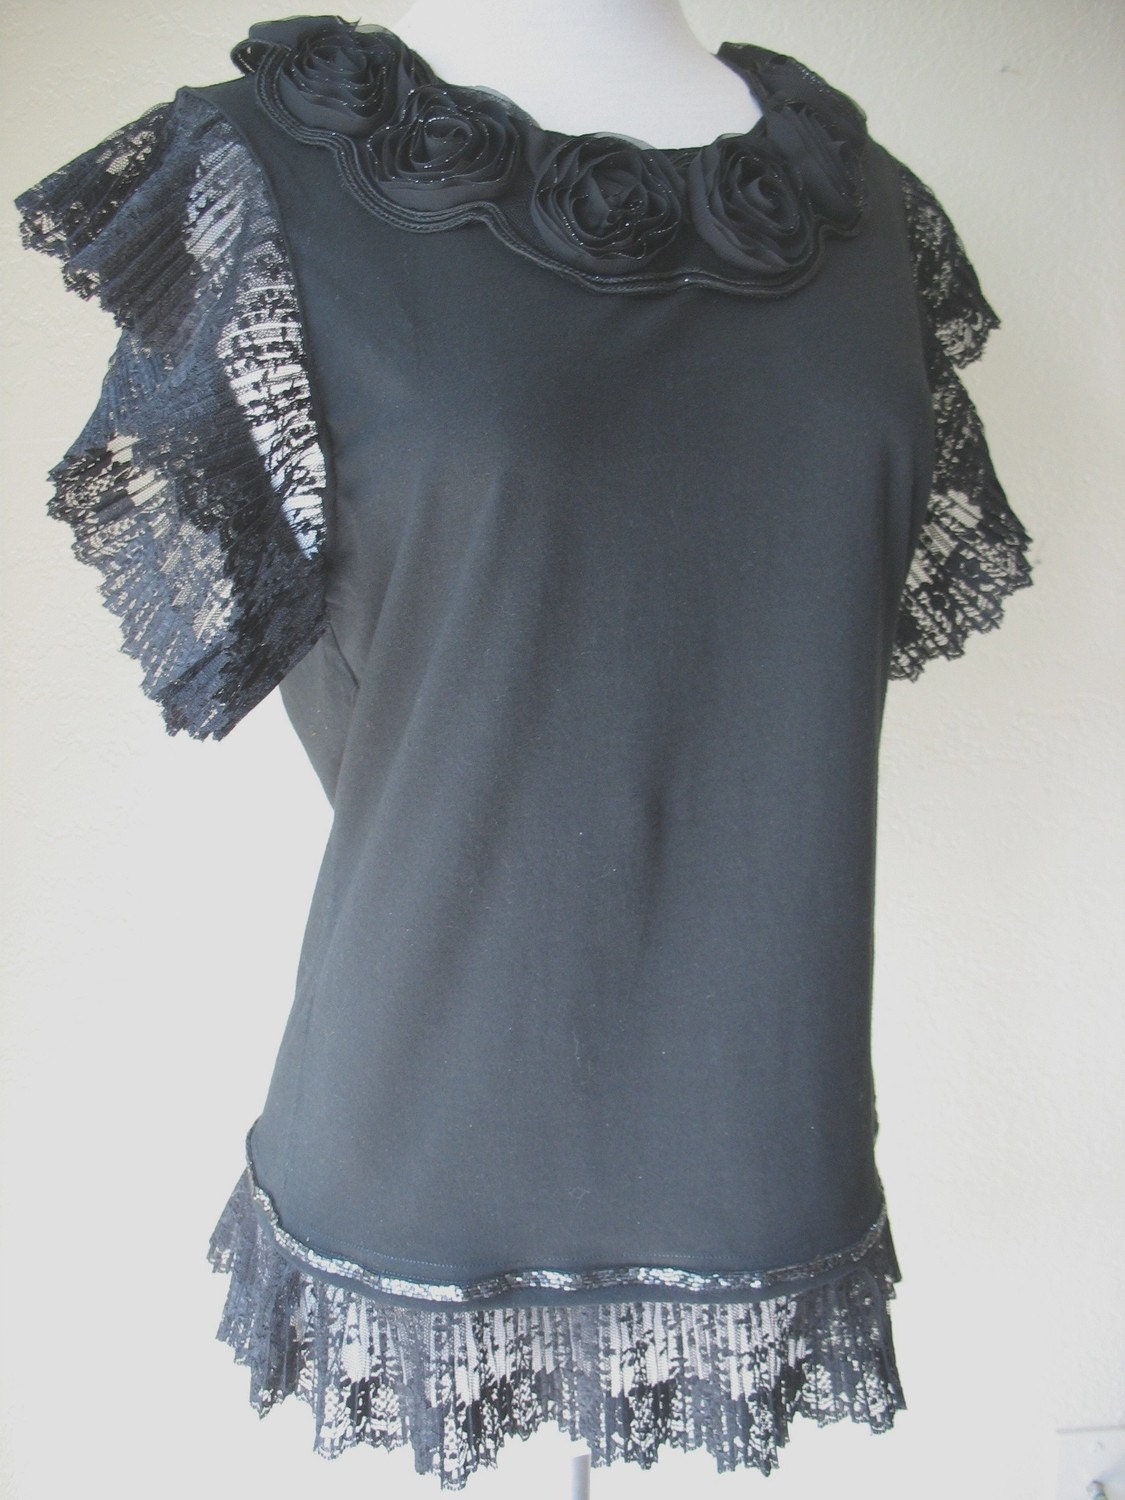 BLACK FANCY TEE with VINTAGE LACE by MaggieGlynn